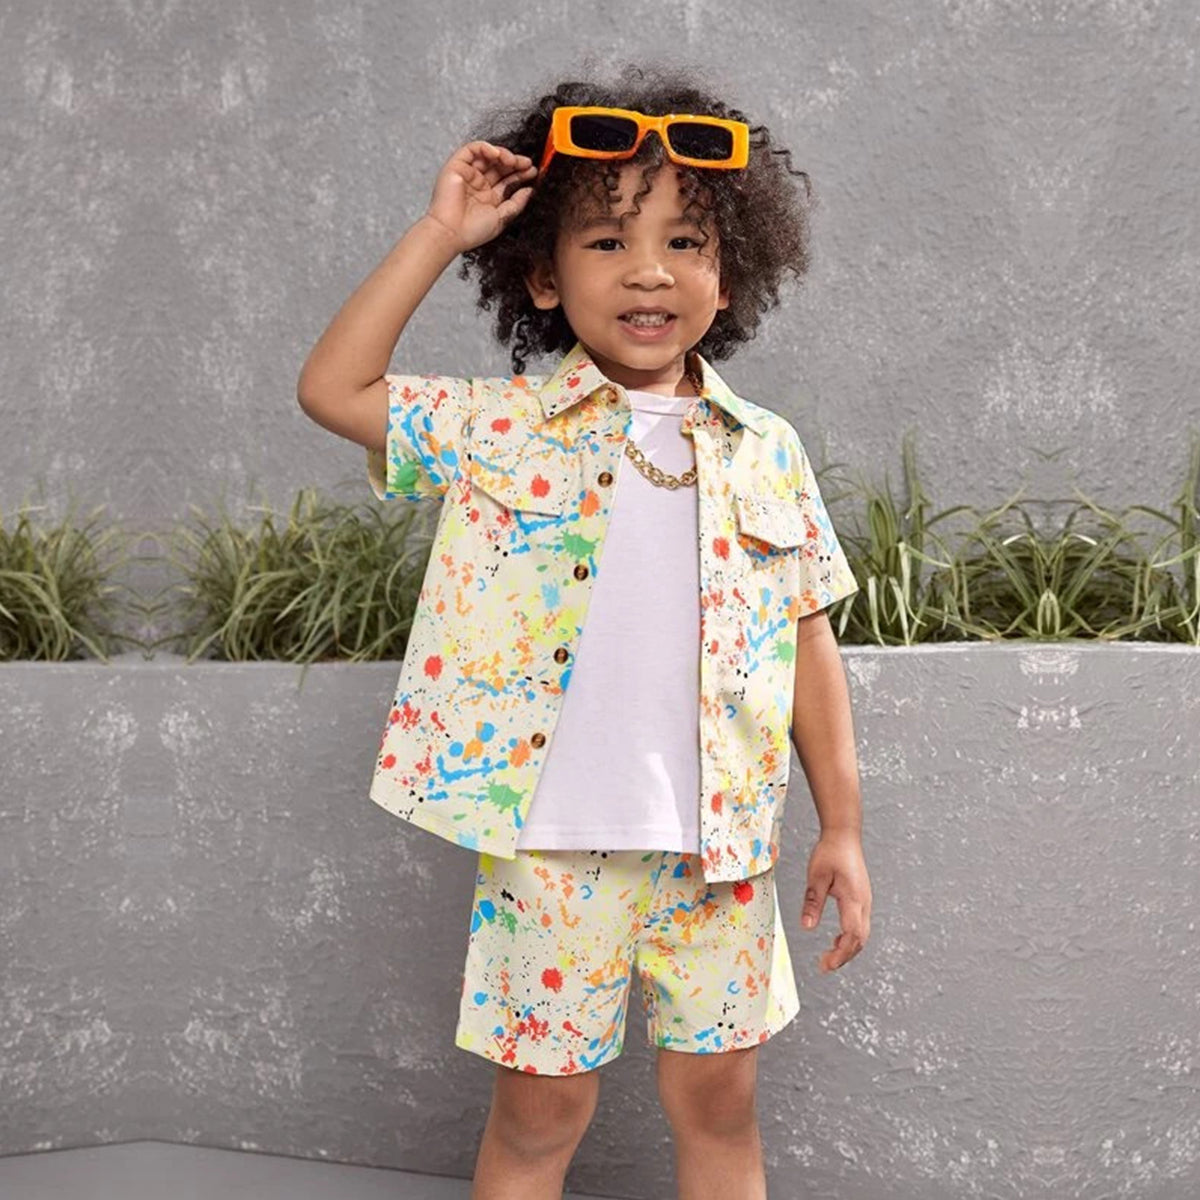 Venutaloza Baby Set Rainbow & Apricot-Colored (Combo Pack Of 2) Shirt & Shorts Without tee Two Piece Set For Boy & Girls.